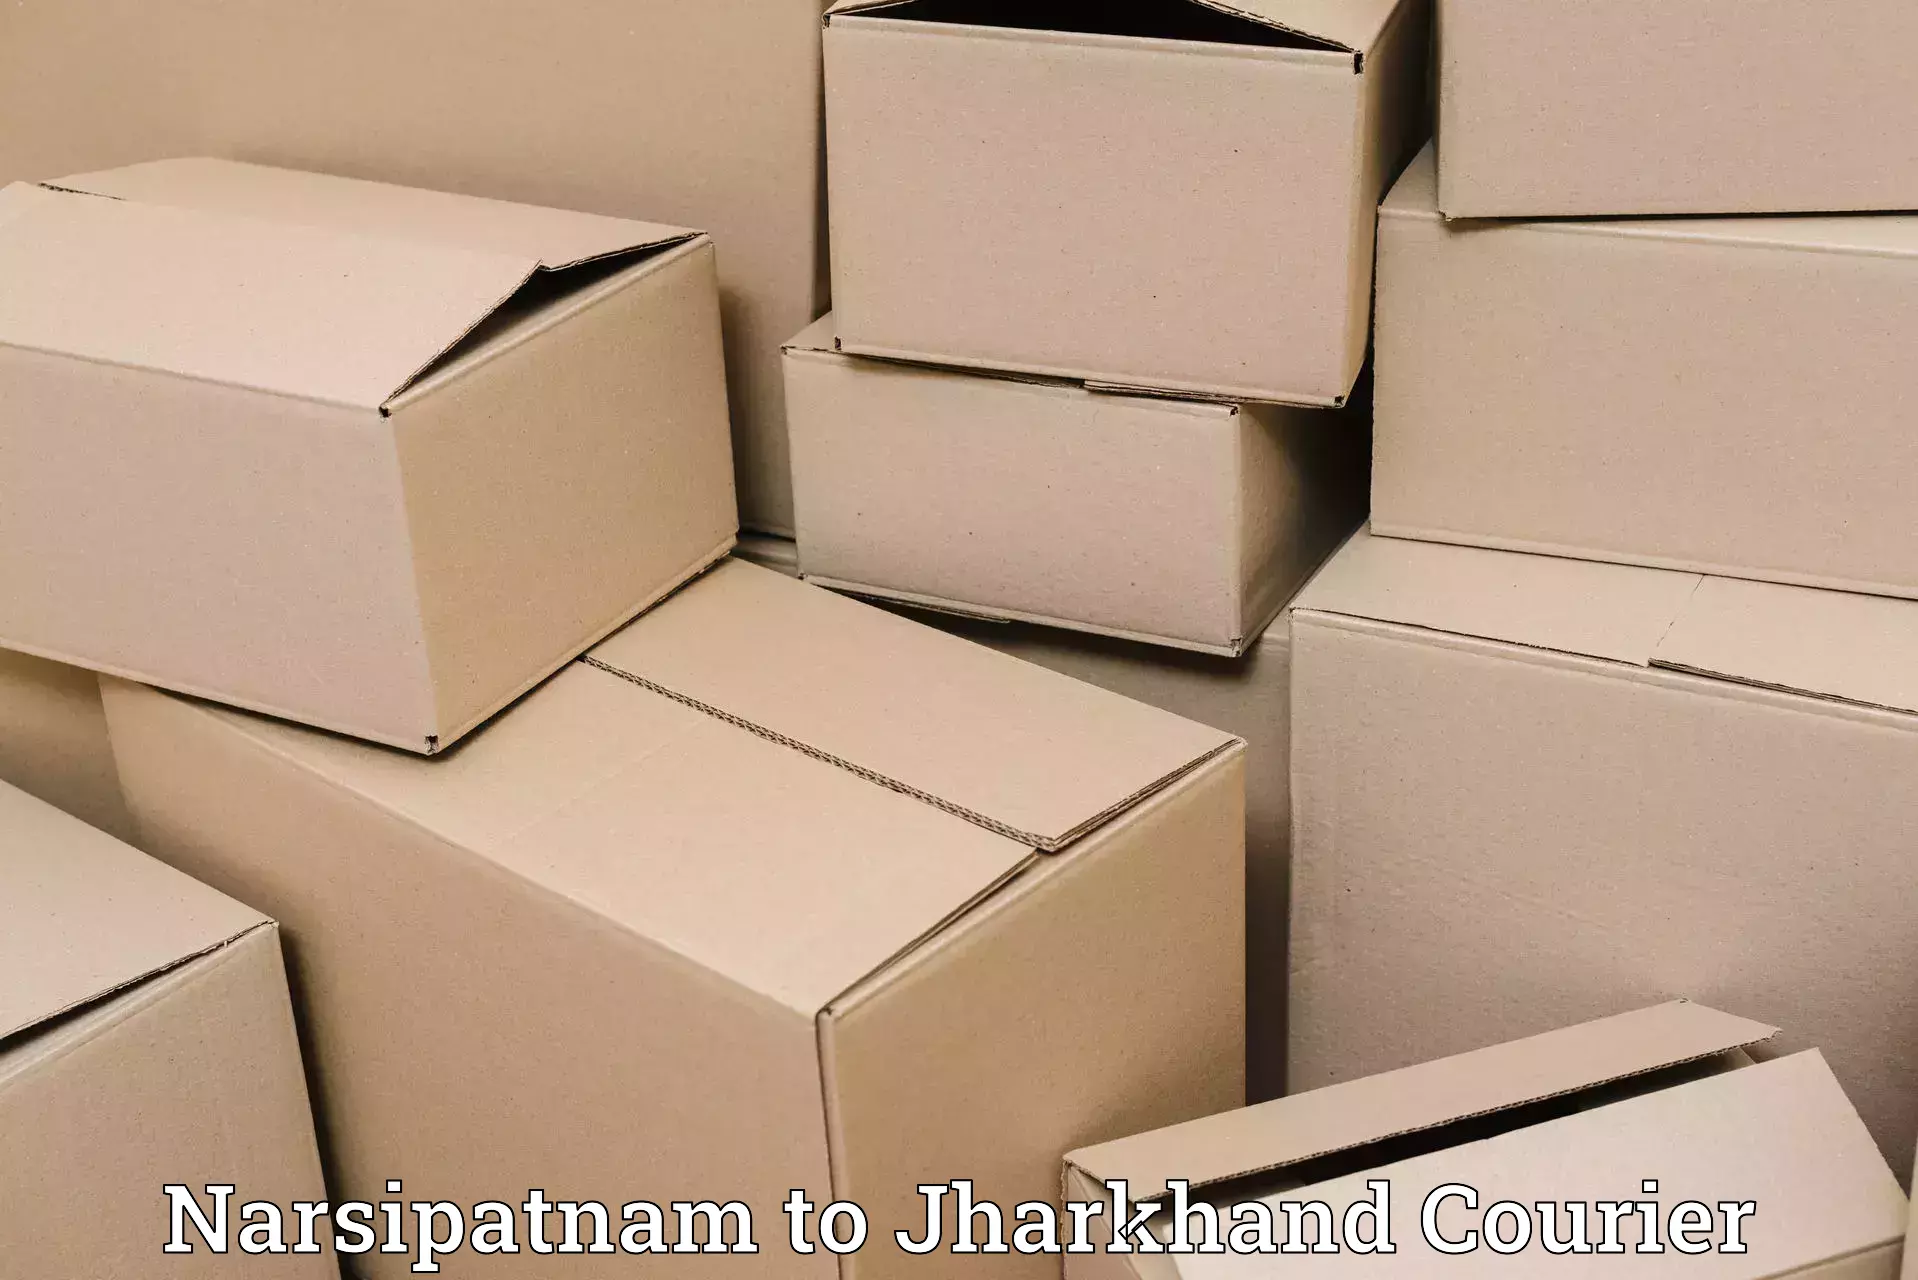 Overnight delivery services Narsipatnam to Tandwa